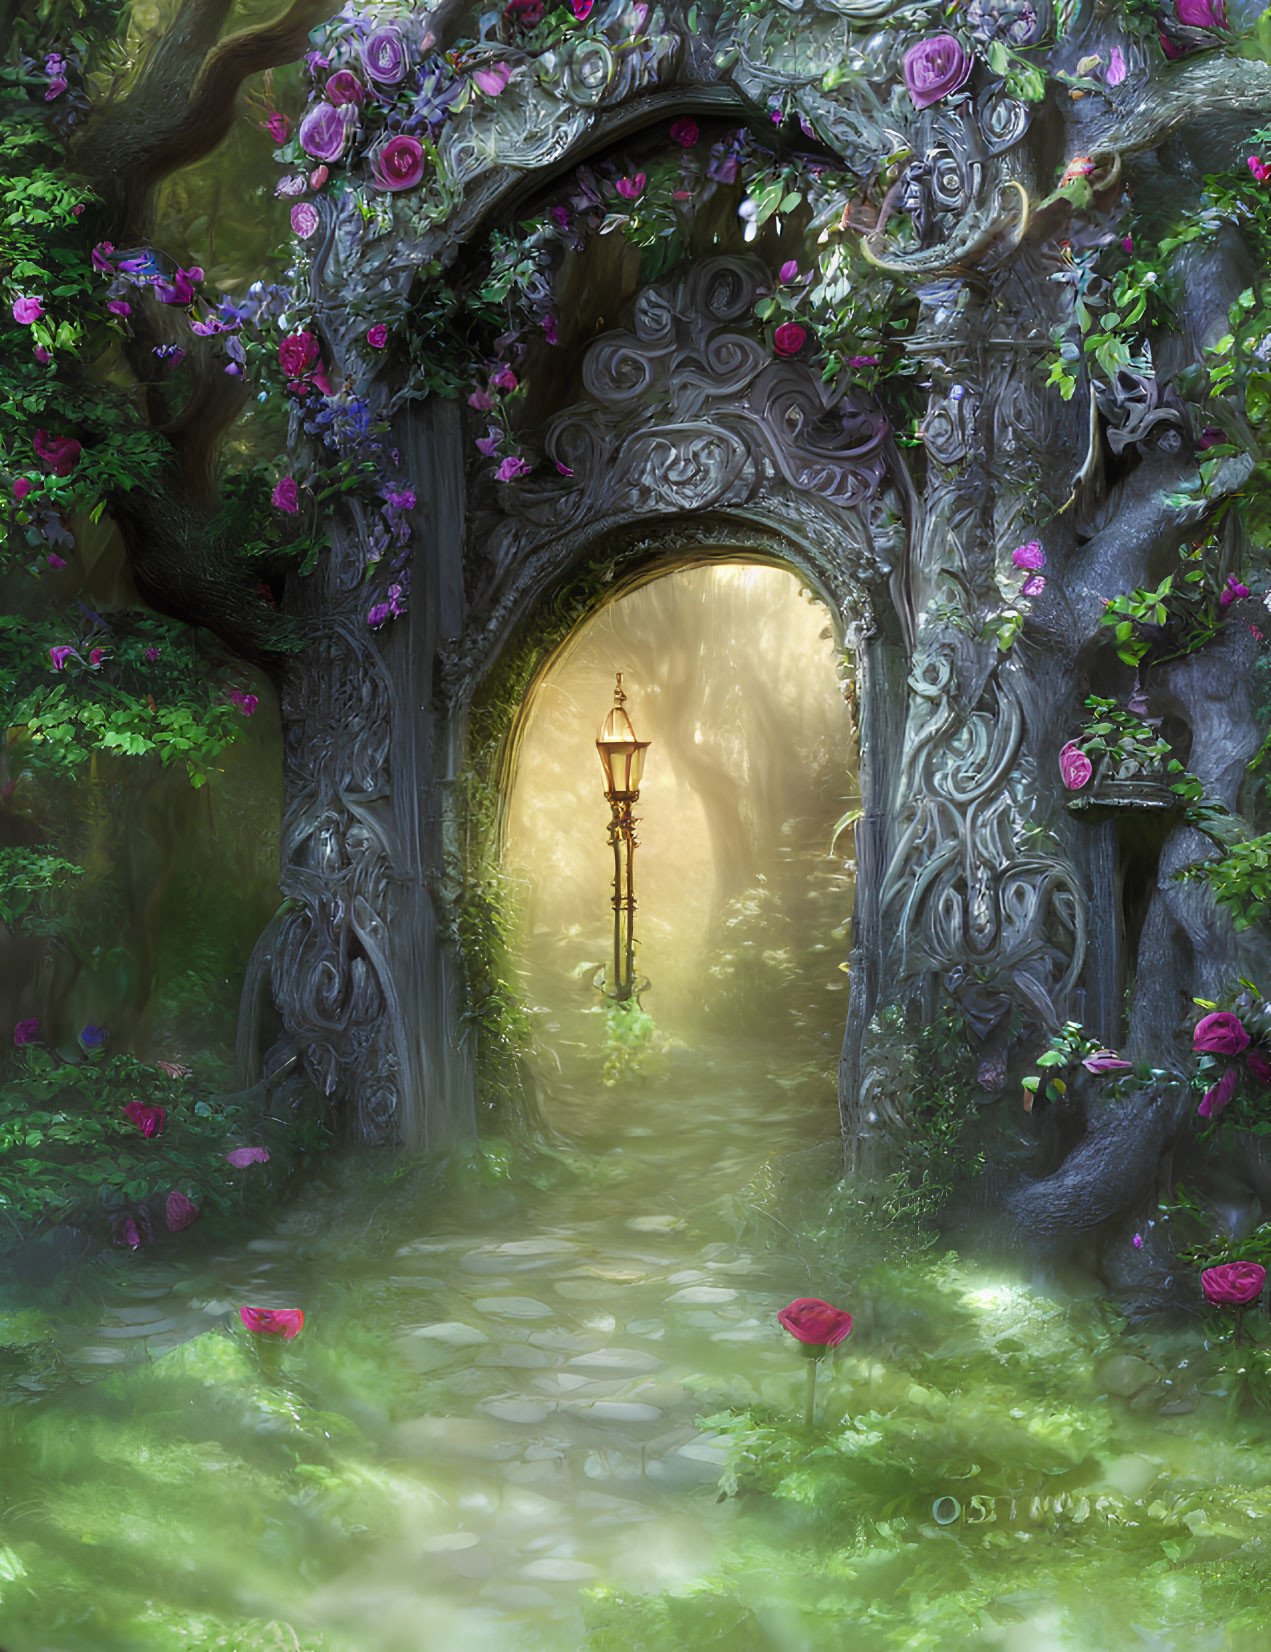 Enchanting forest scene with ornate tree archway and purple flowers